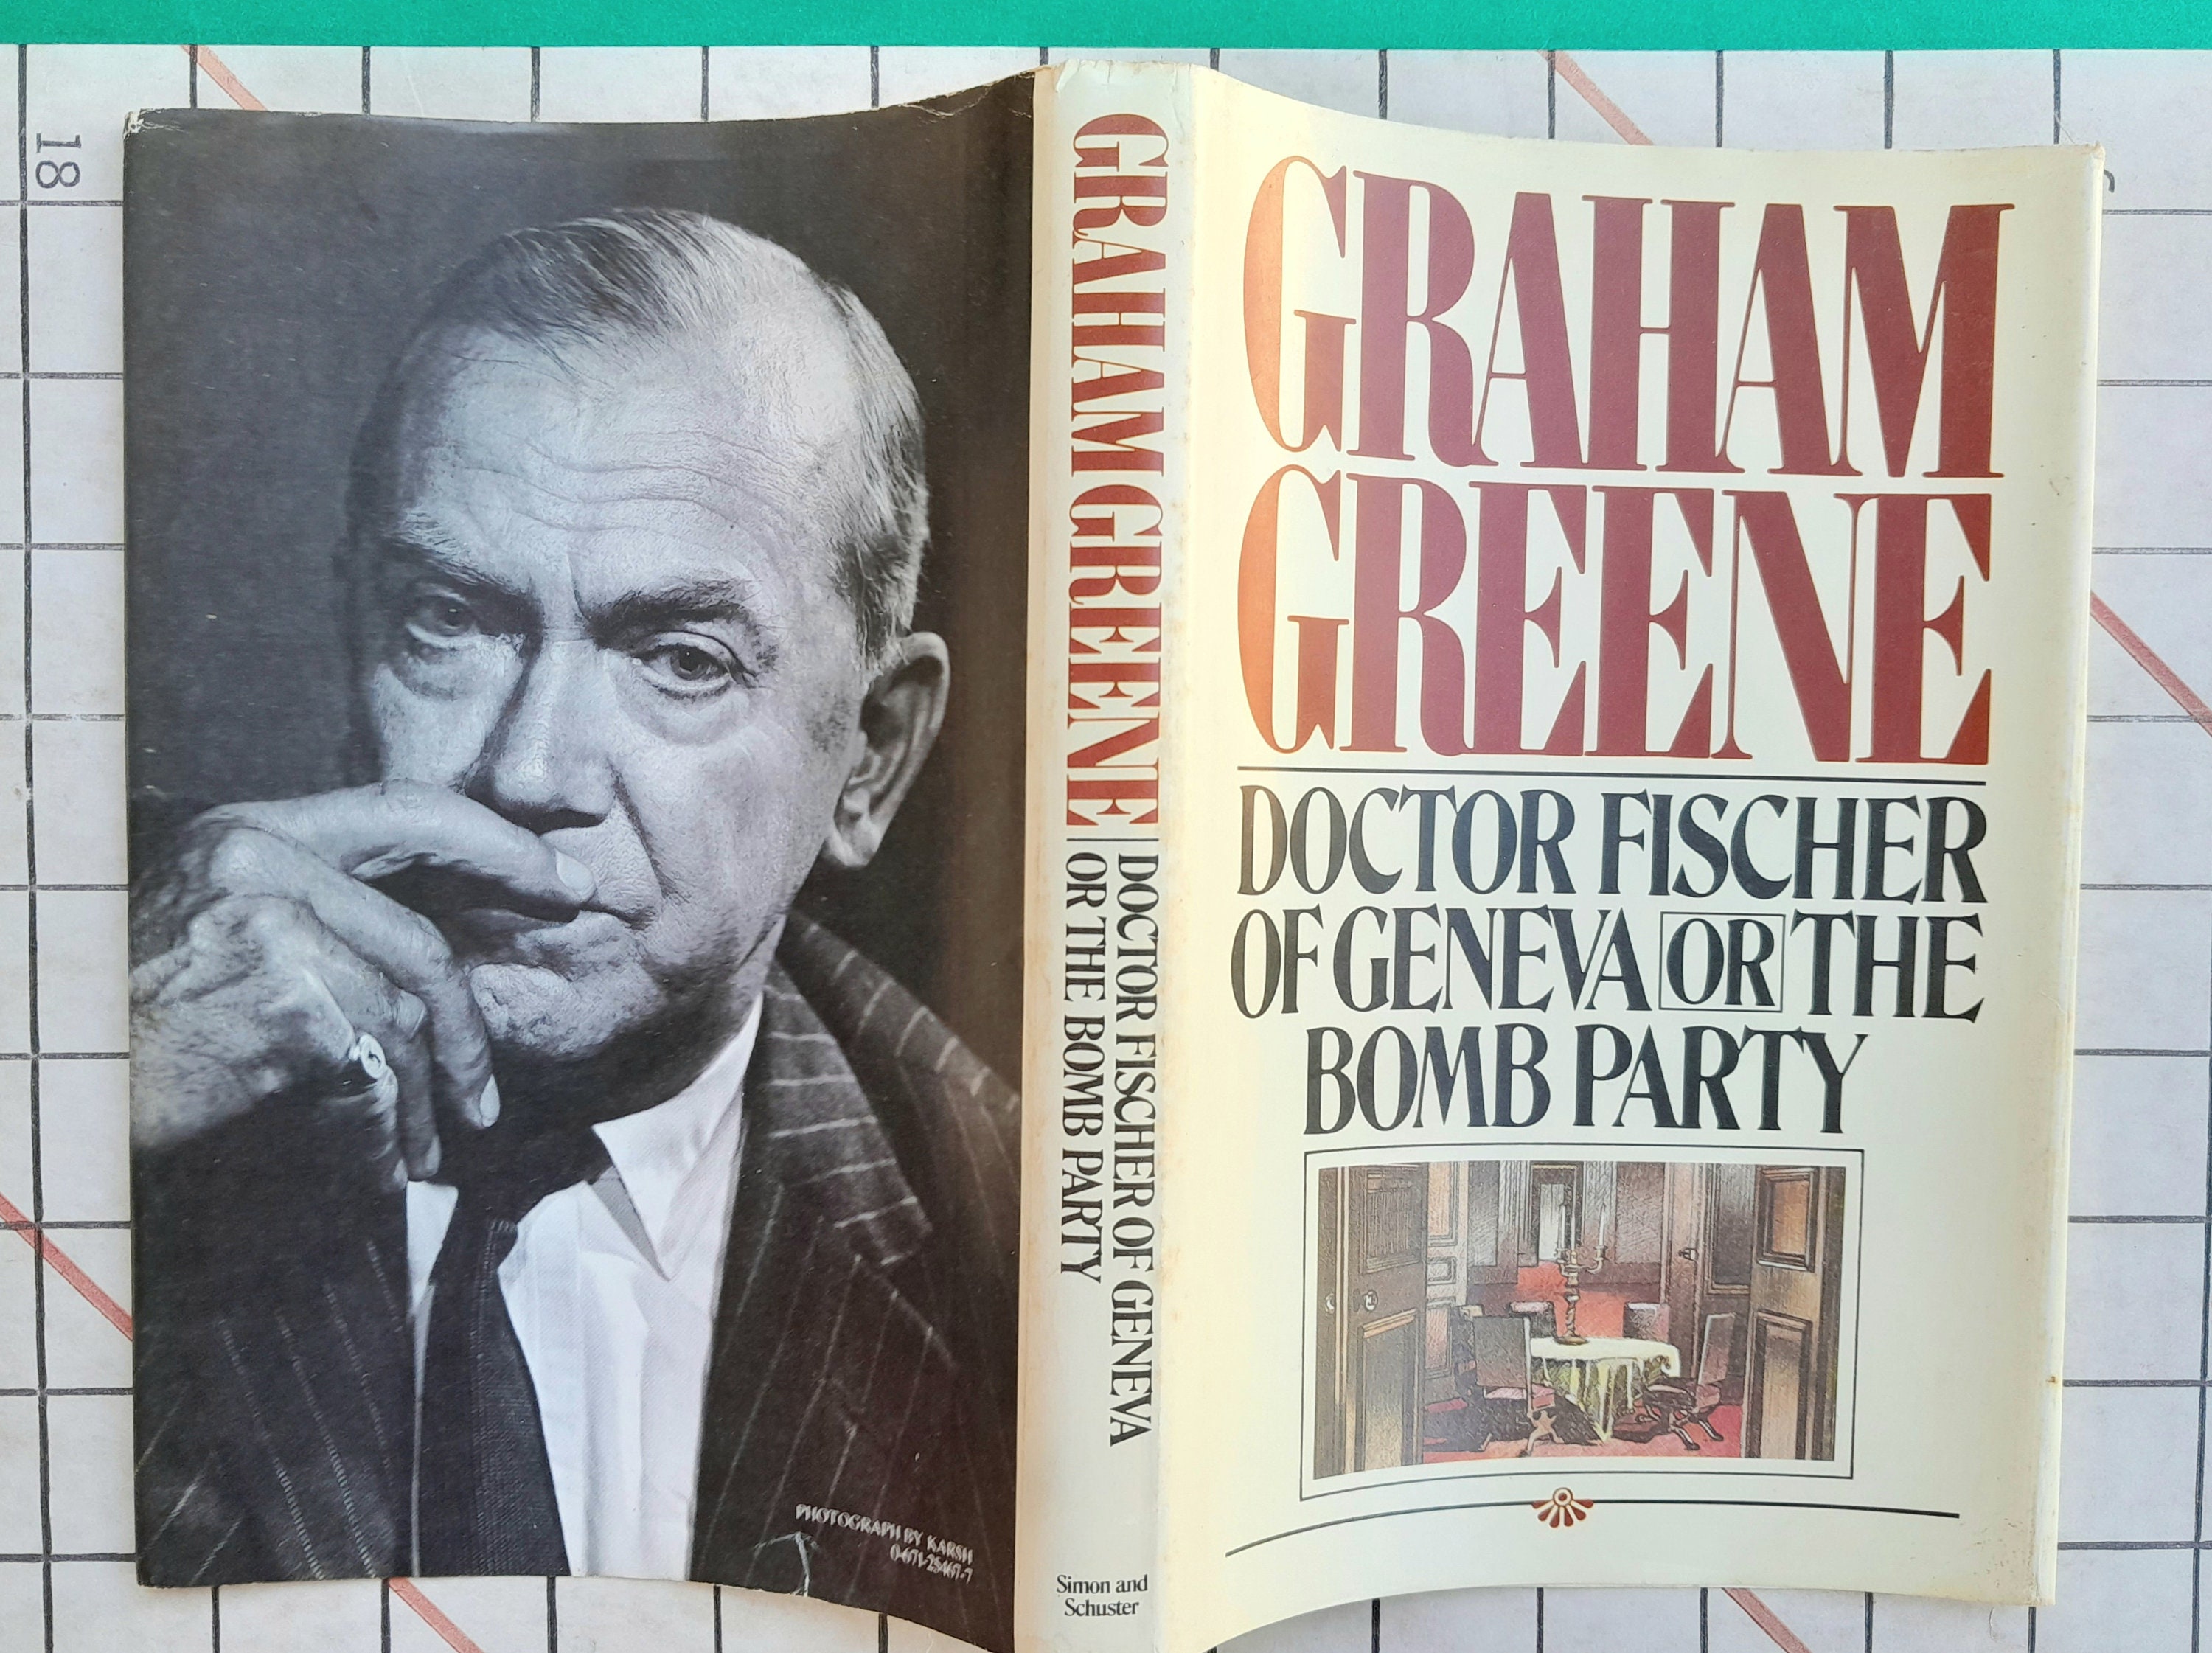 DOCTOR FISCHER OF GENEVA: Or, THE BOMB PARTY